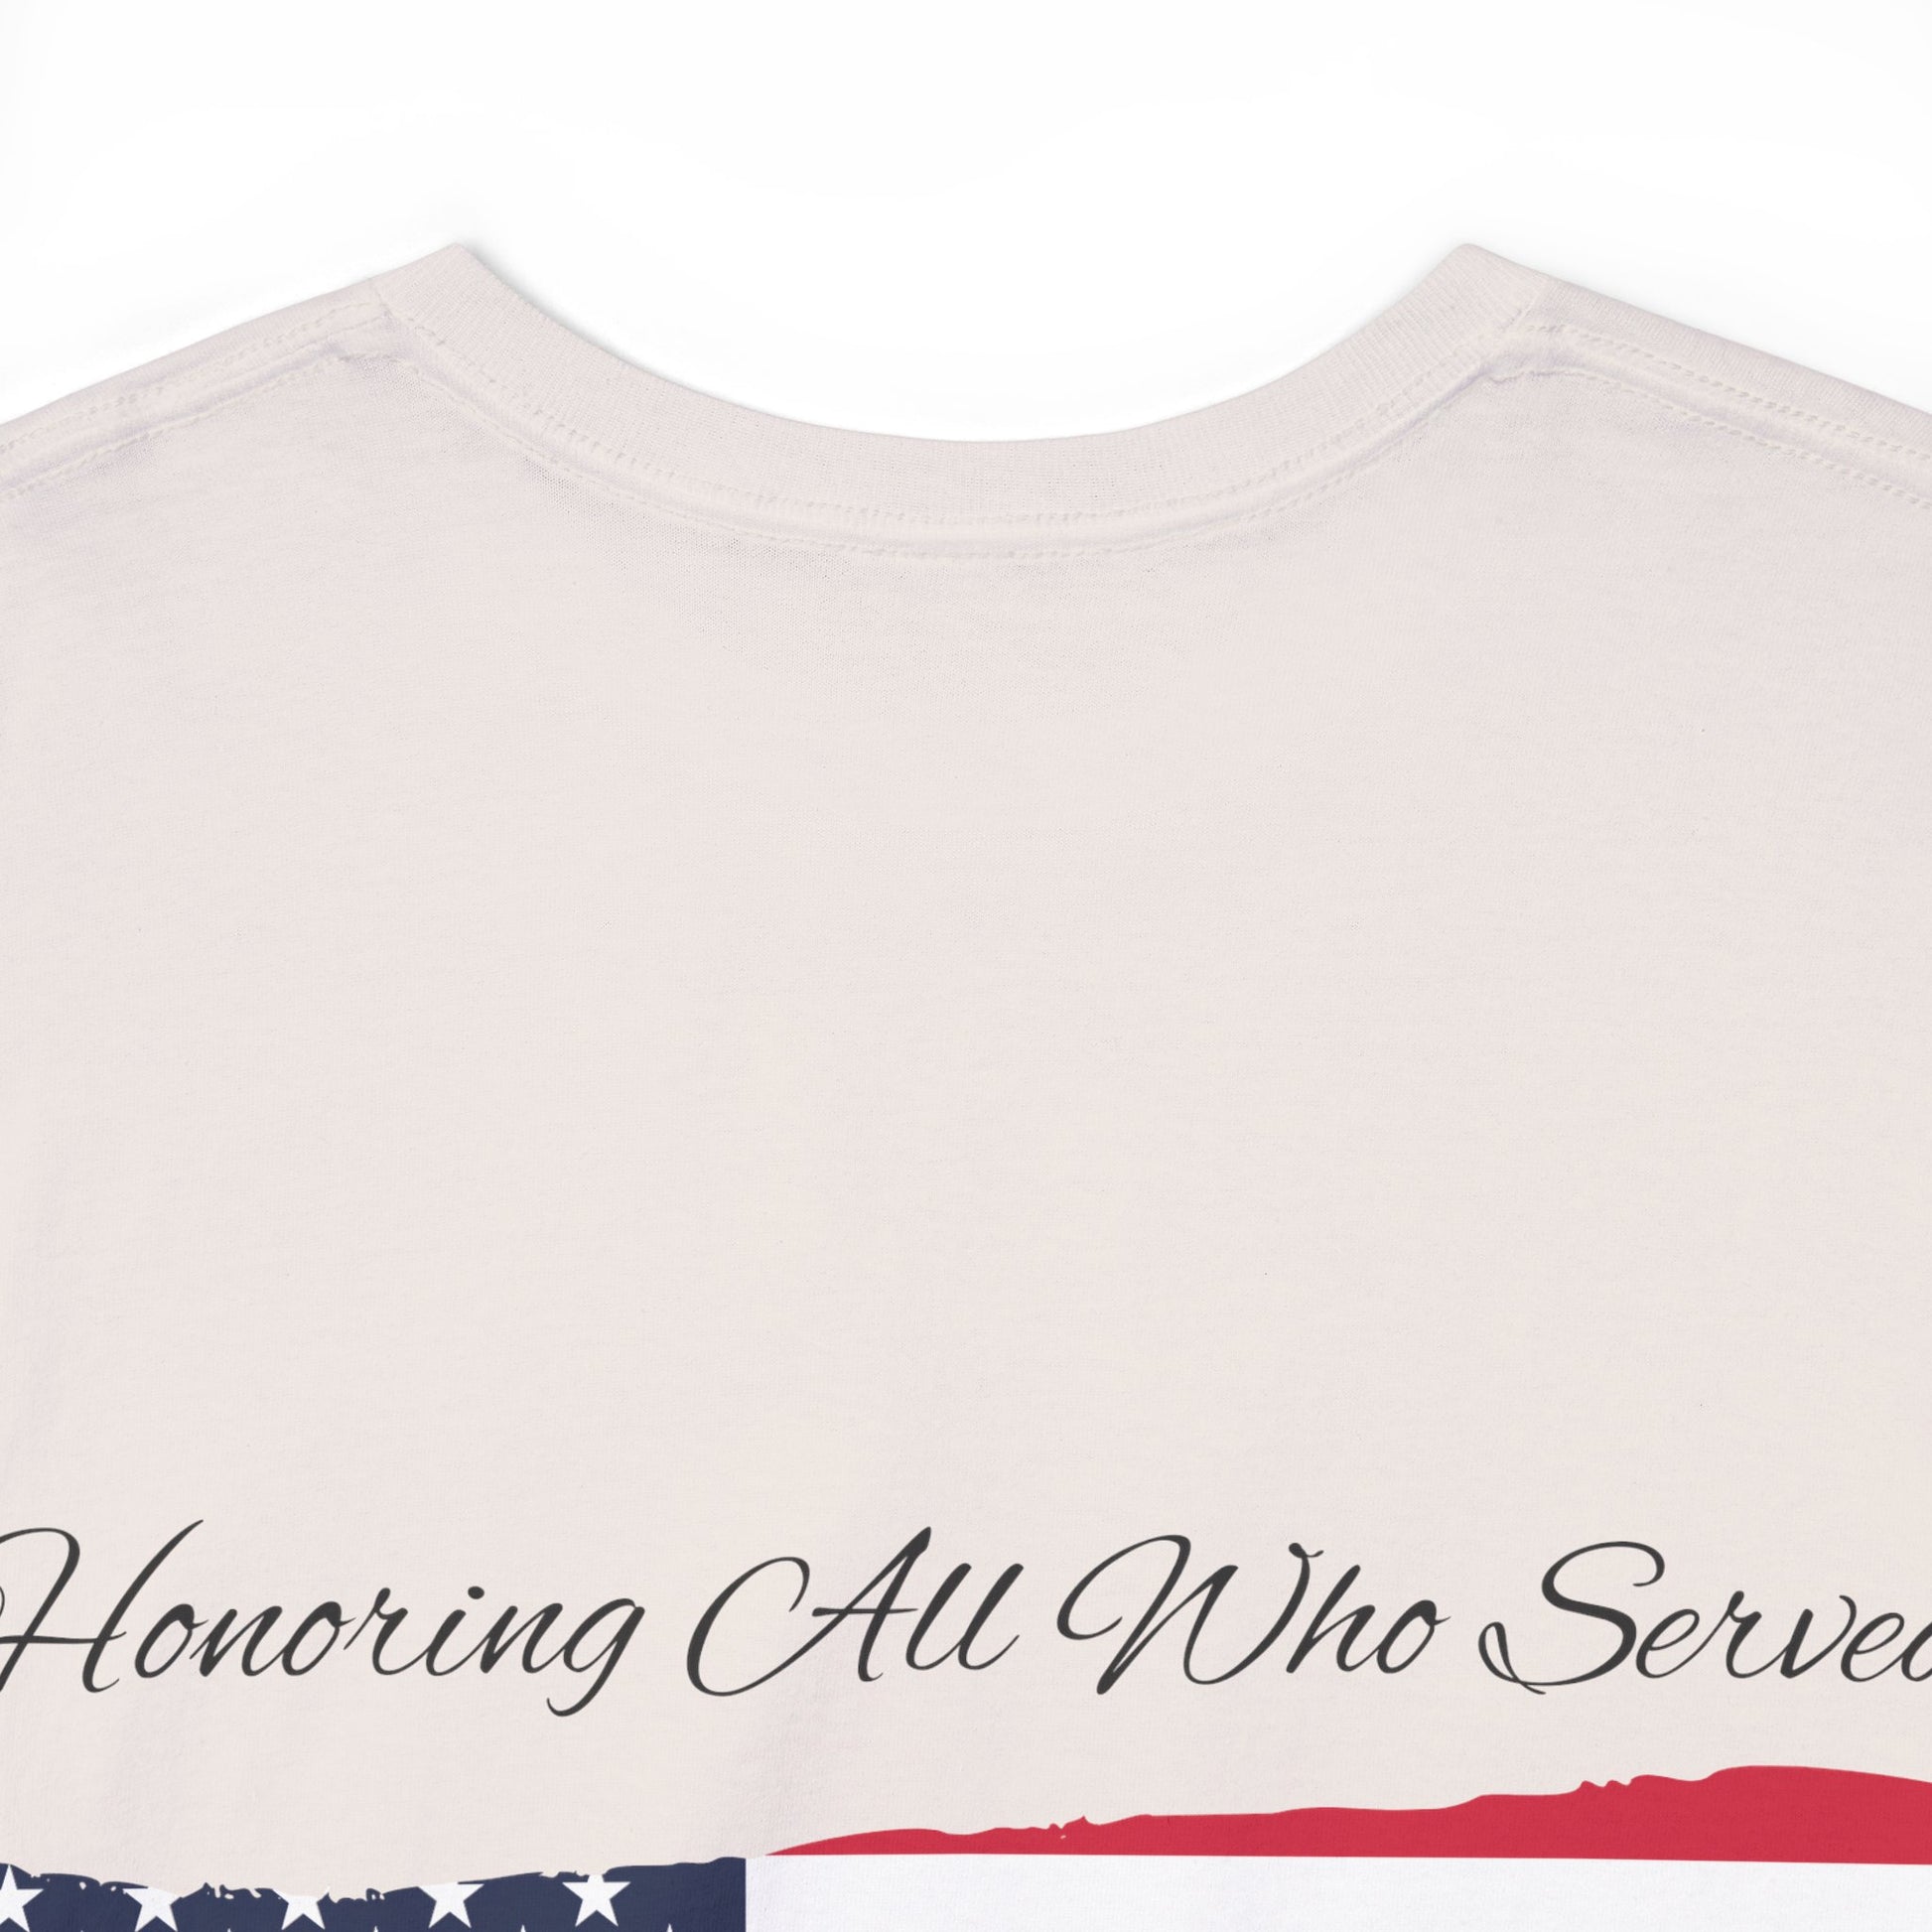 Unisex cotton tee with 'Honoring All Who Served' print for veterans tribute28